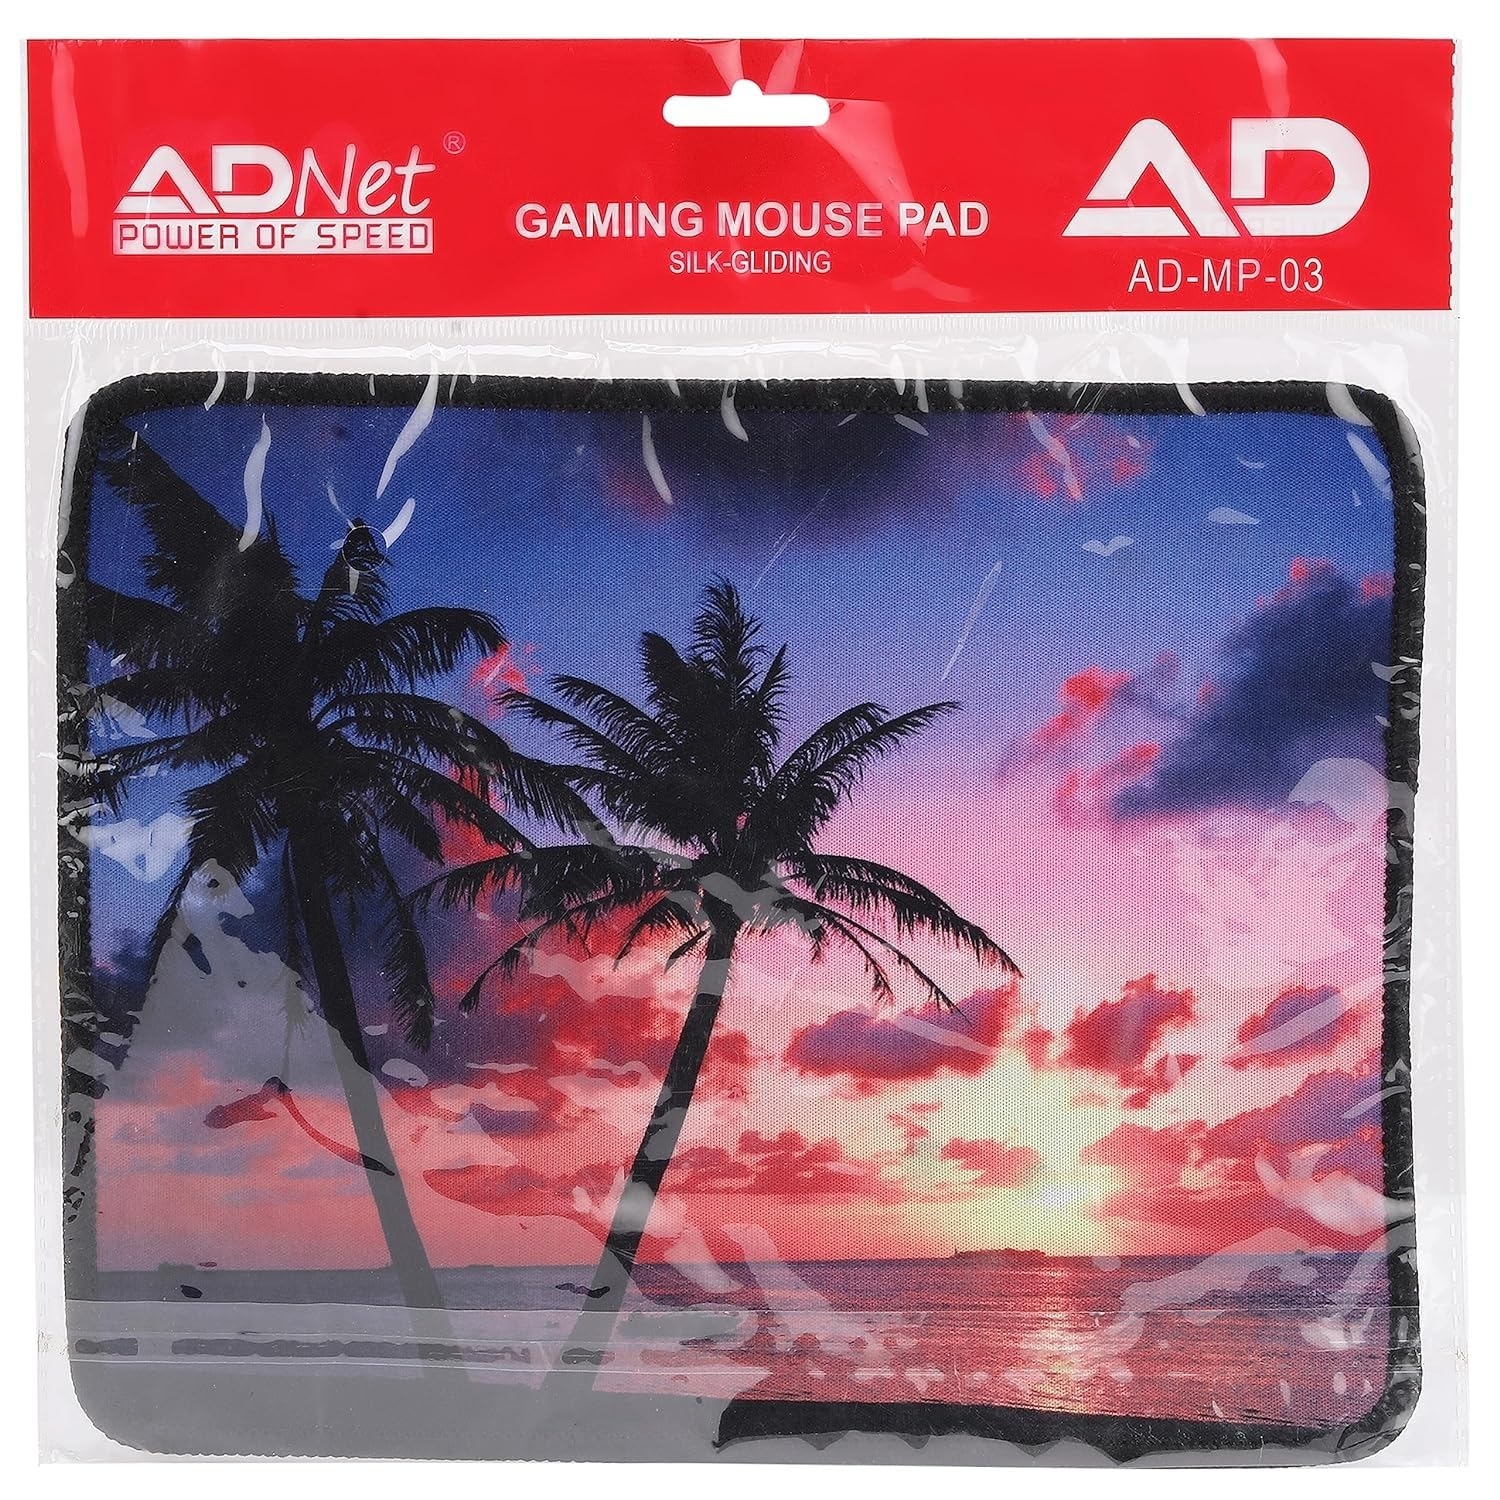 ADNET Gaming Mouse Pad for Laptop/Computer (Gifts for Men/Women/Girl/Boys) Size 25x20 CM -Multi Design Mouse Pad